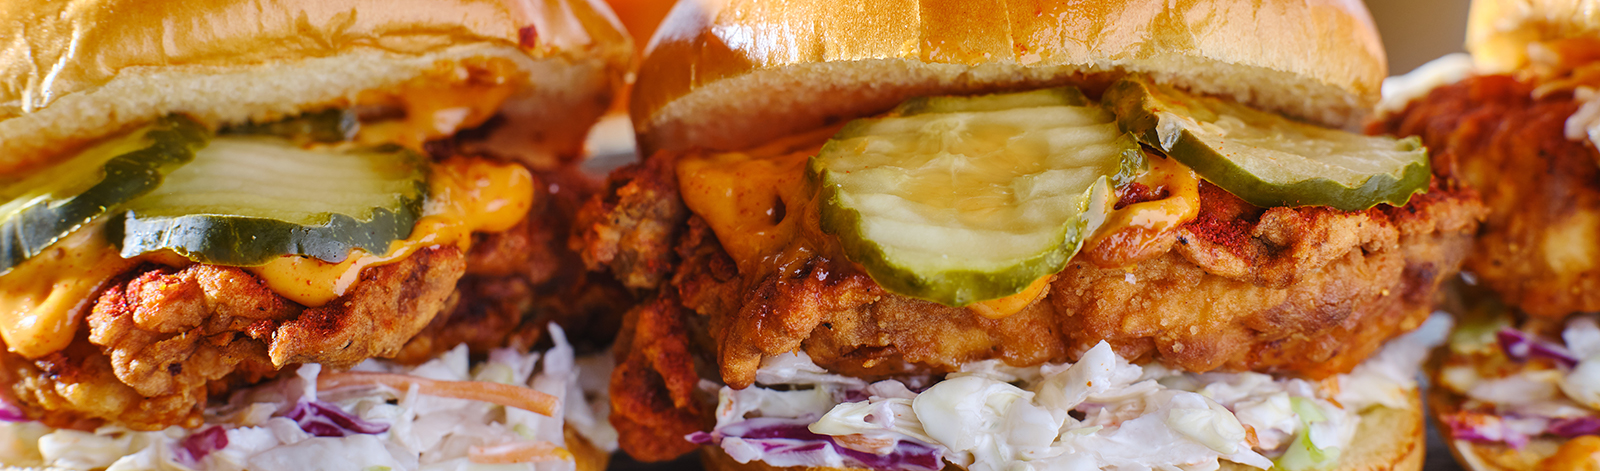 Spicy Nashville hot chicken sandwich with coleslaw and pickles